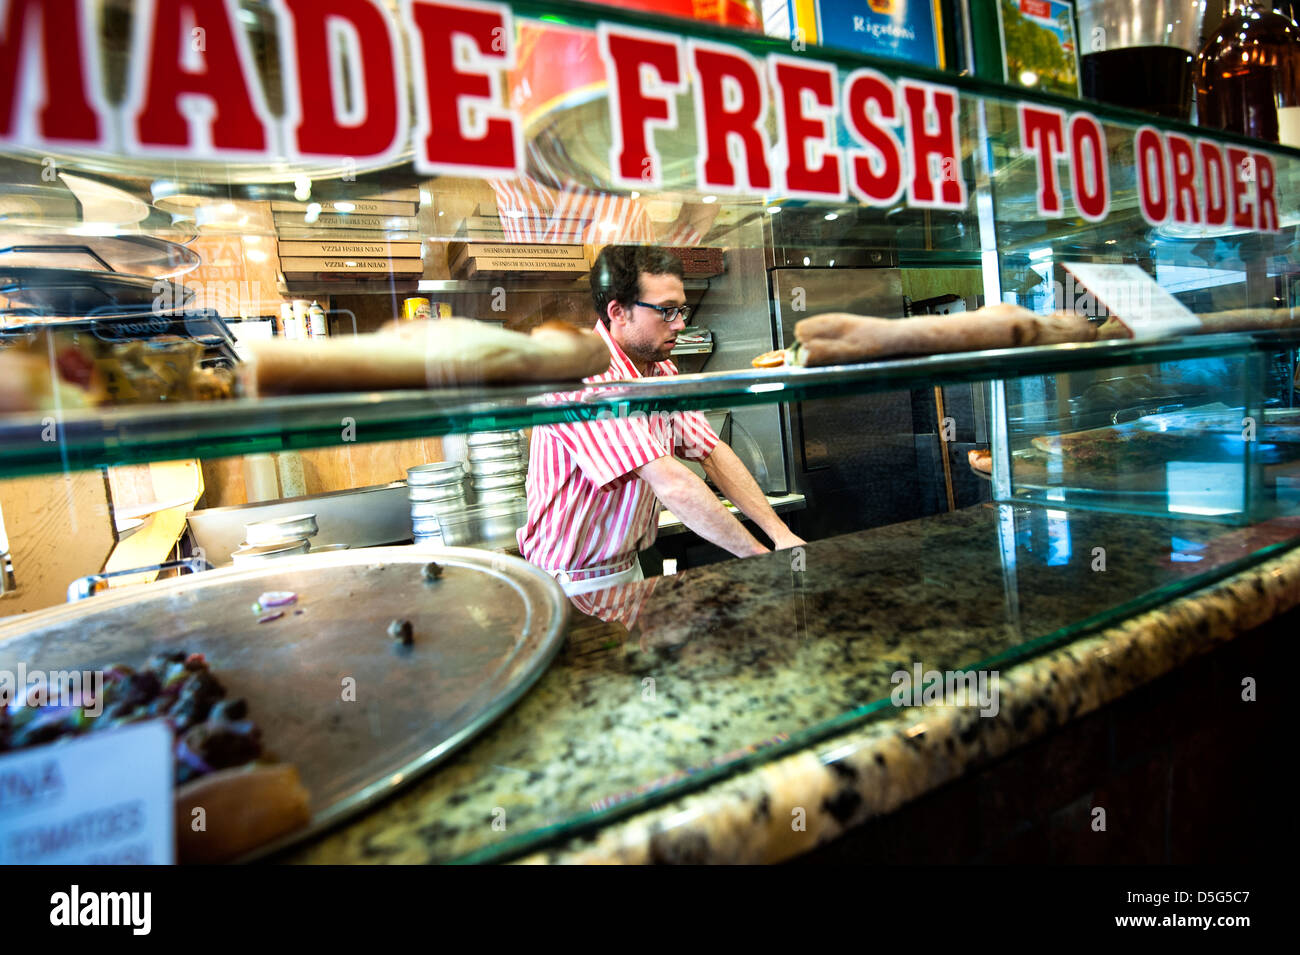 New York style pizza restaurant with man making pizza behind glass counter Stock Photo